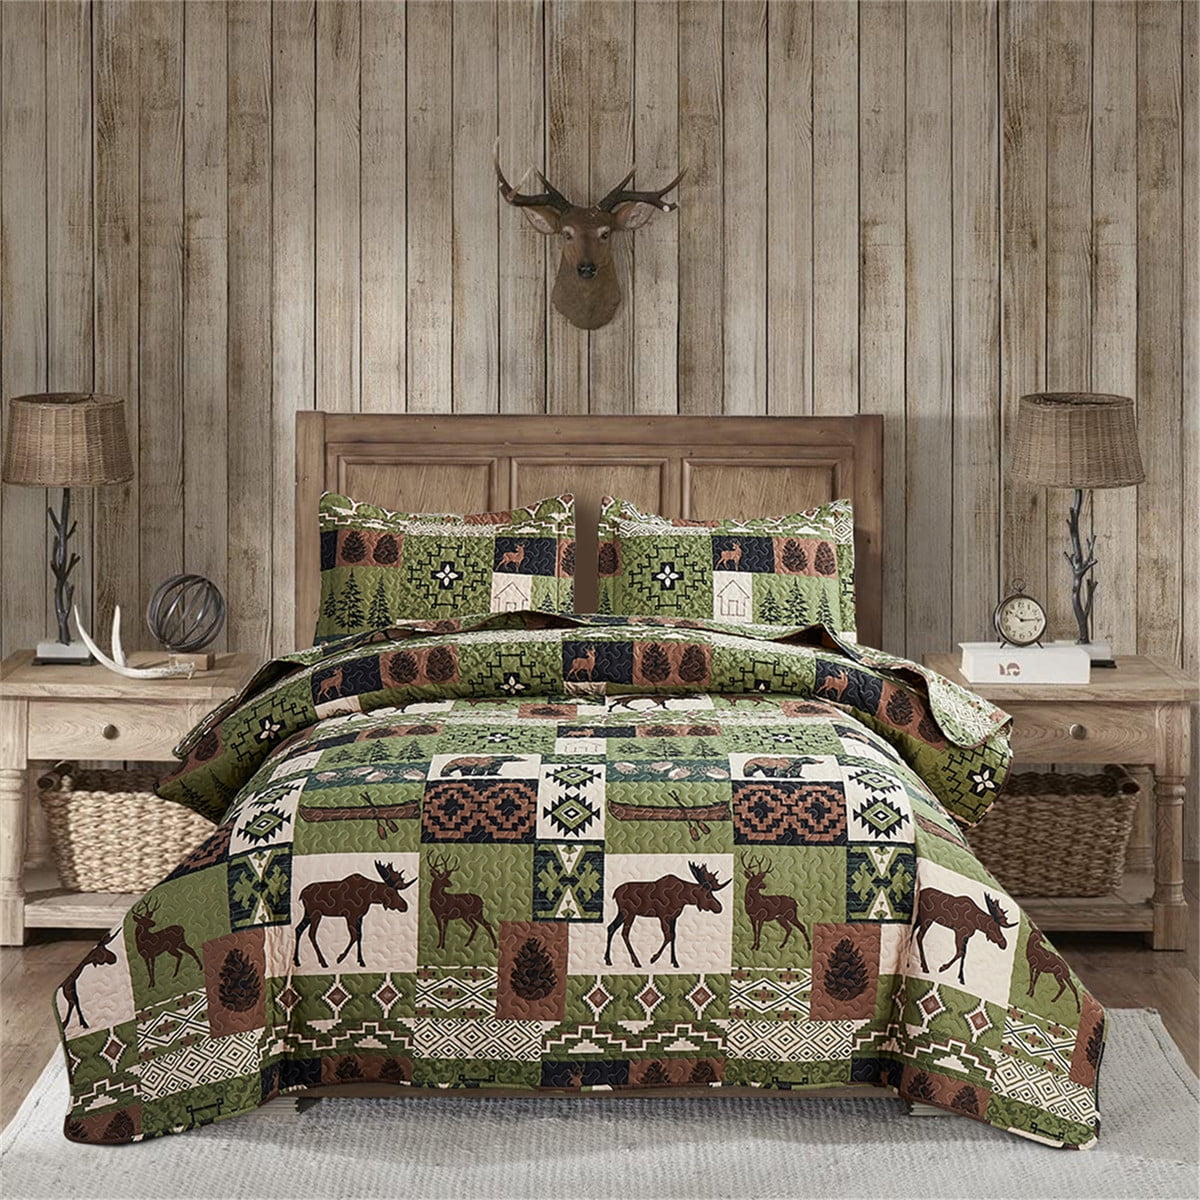 Camping cabin life chalet all day plaid moose deer bear pattern